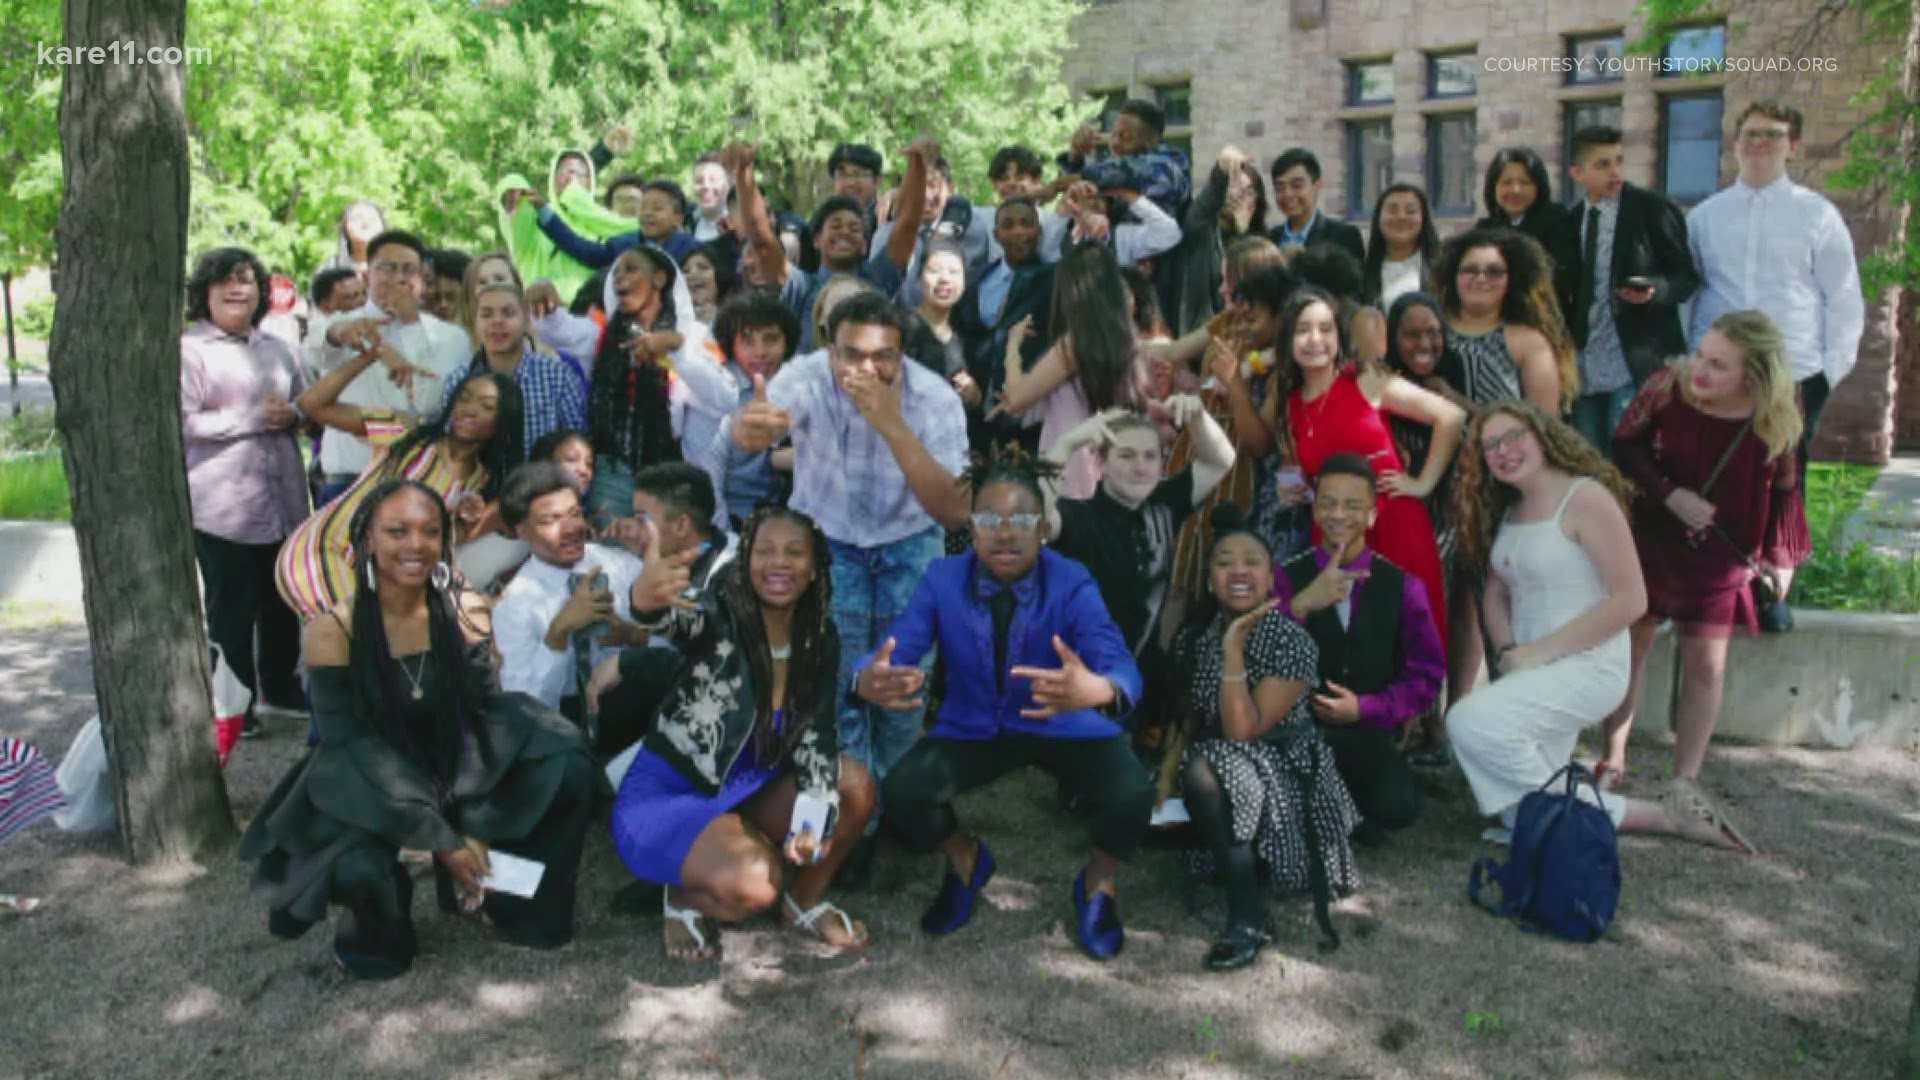 The program from the Universiy of Minnesota connects undergrads to middle schoolers through storytelling.